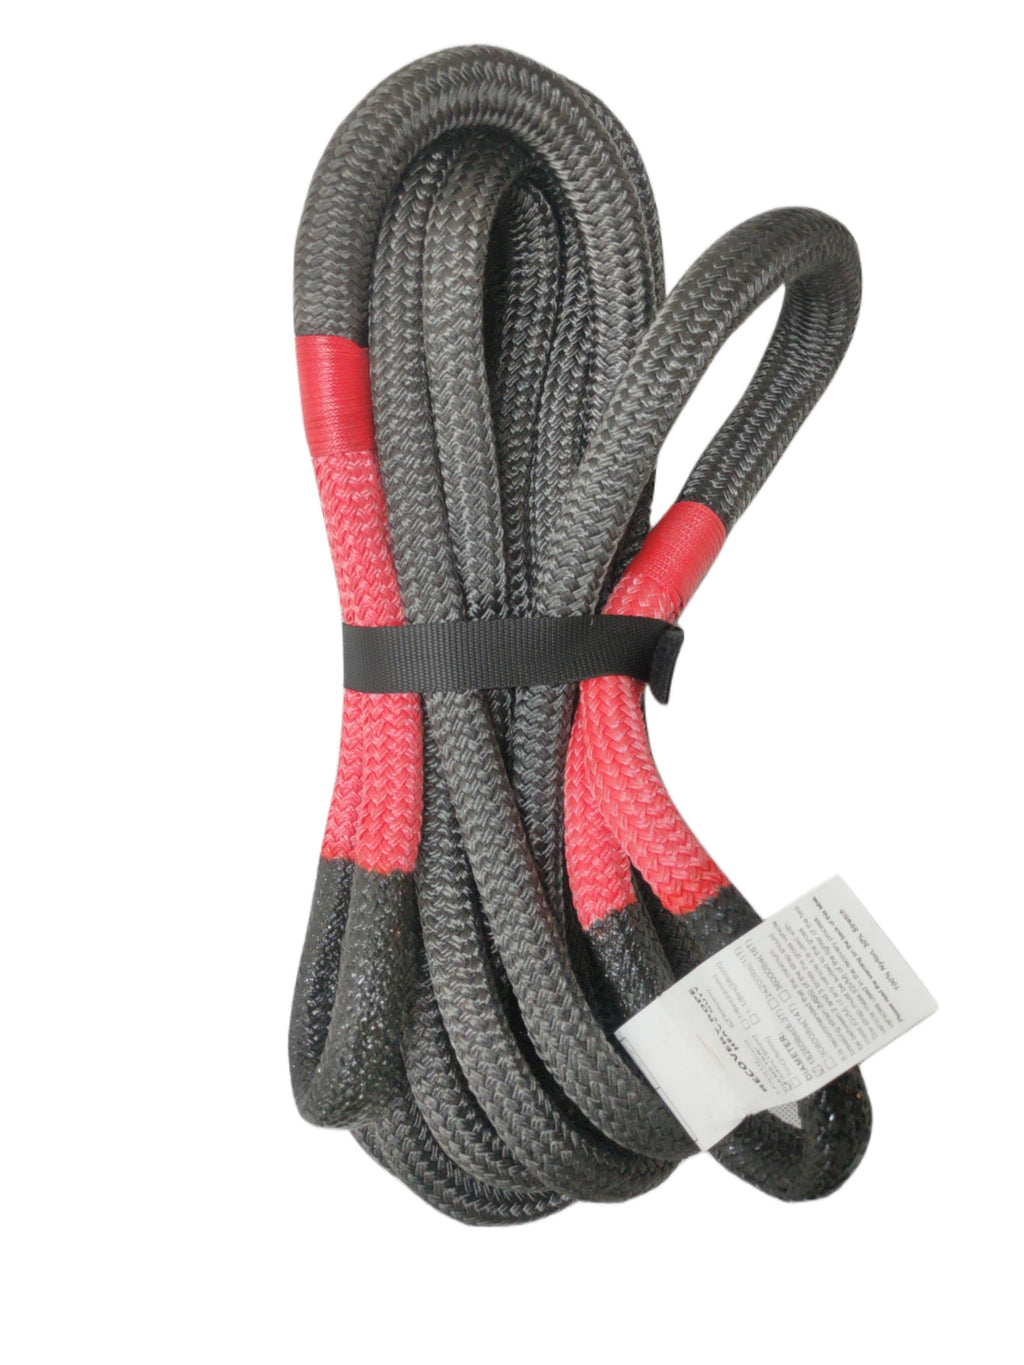 AMR Heavy- Duty Towing Rope for Jeep Wrangler